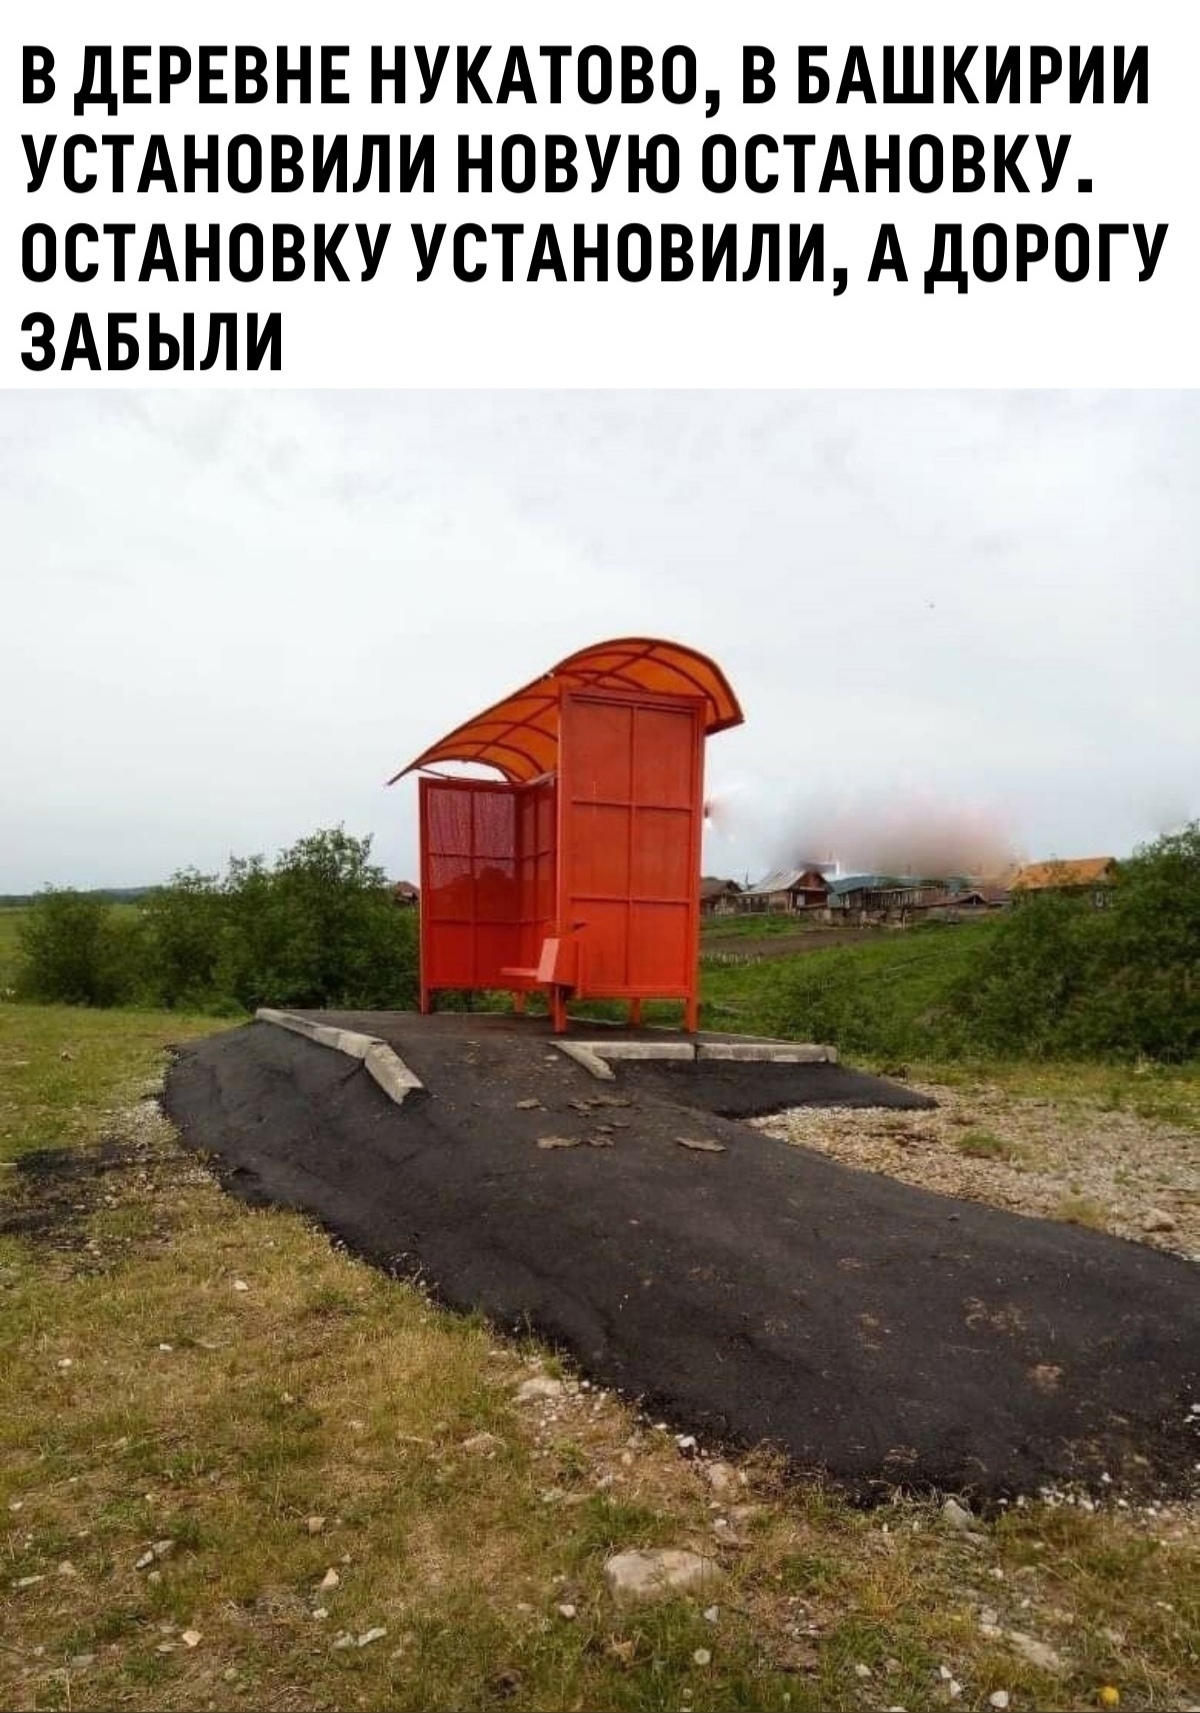 Looks like asphalt... - news, Picture with text, , Power, Road, Stop, Bashkirs